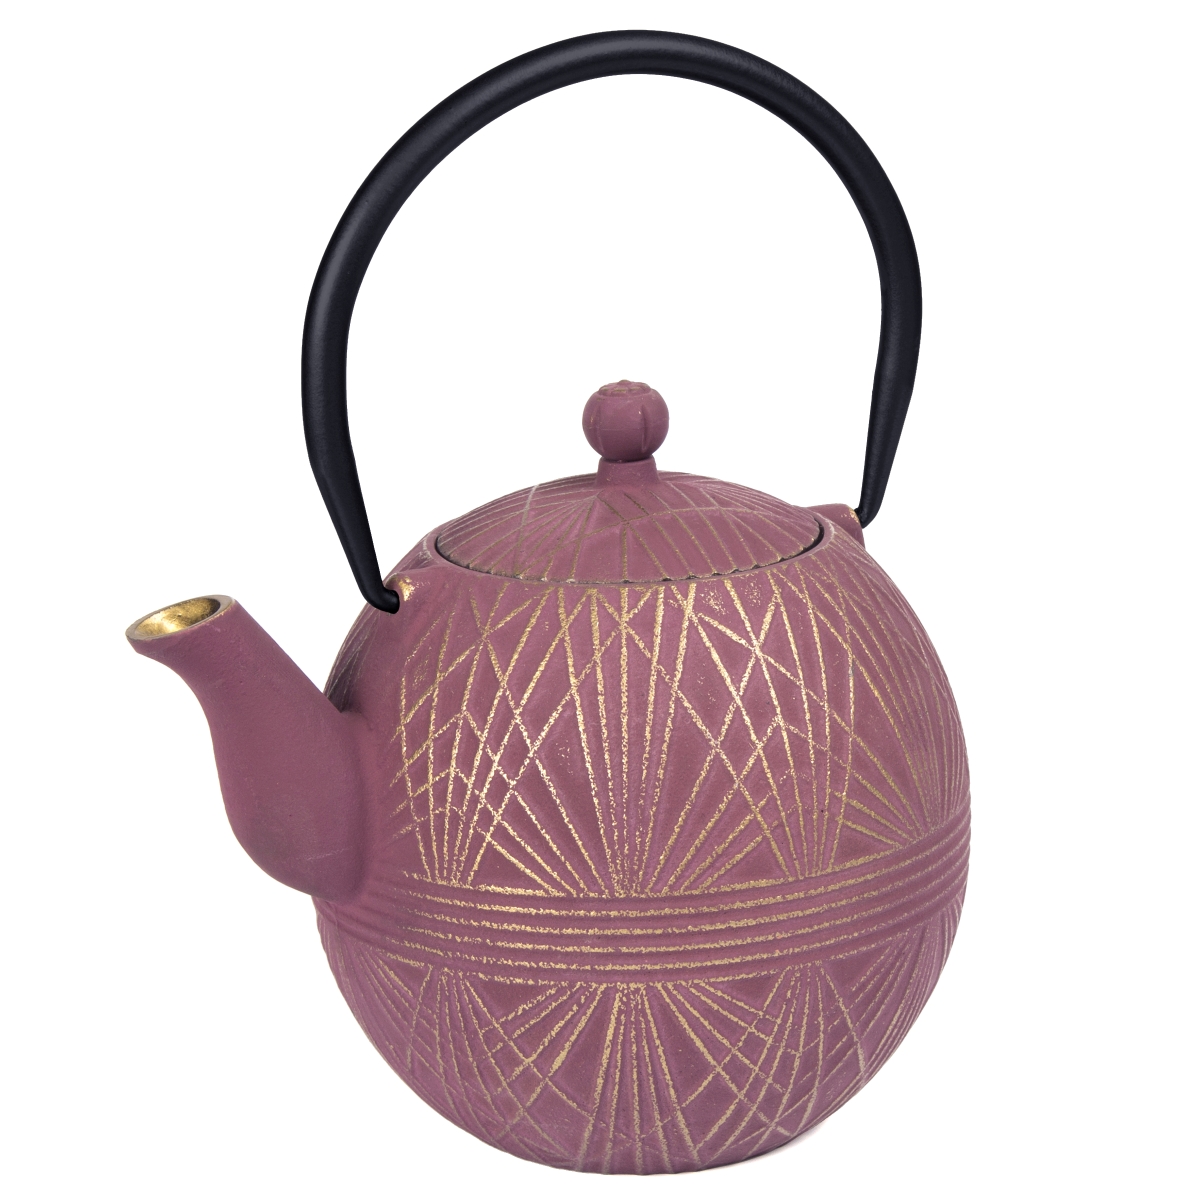 Picture of Creative Home  73517 Creative Home 34 oz Cast Iron Tea Pot, New Gold and Purple Color,